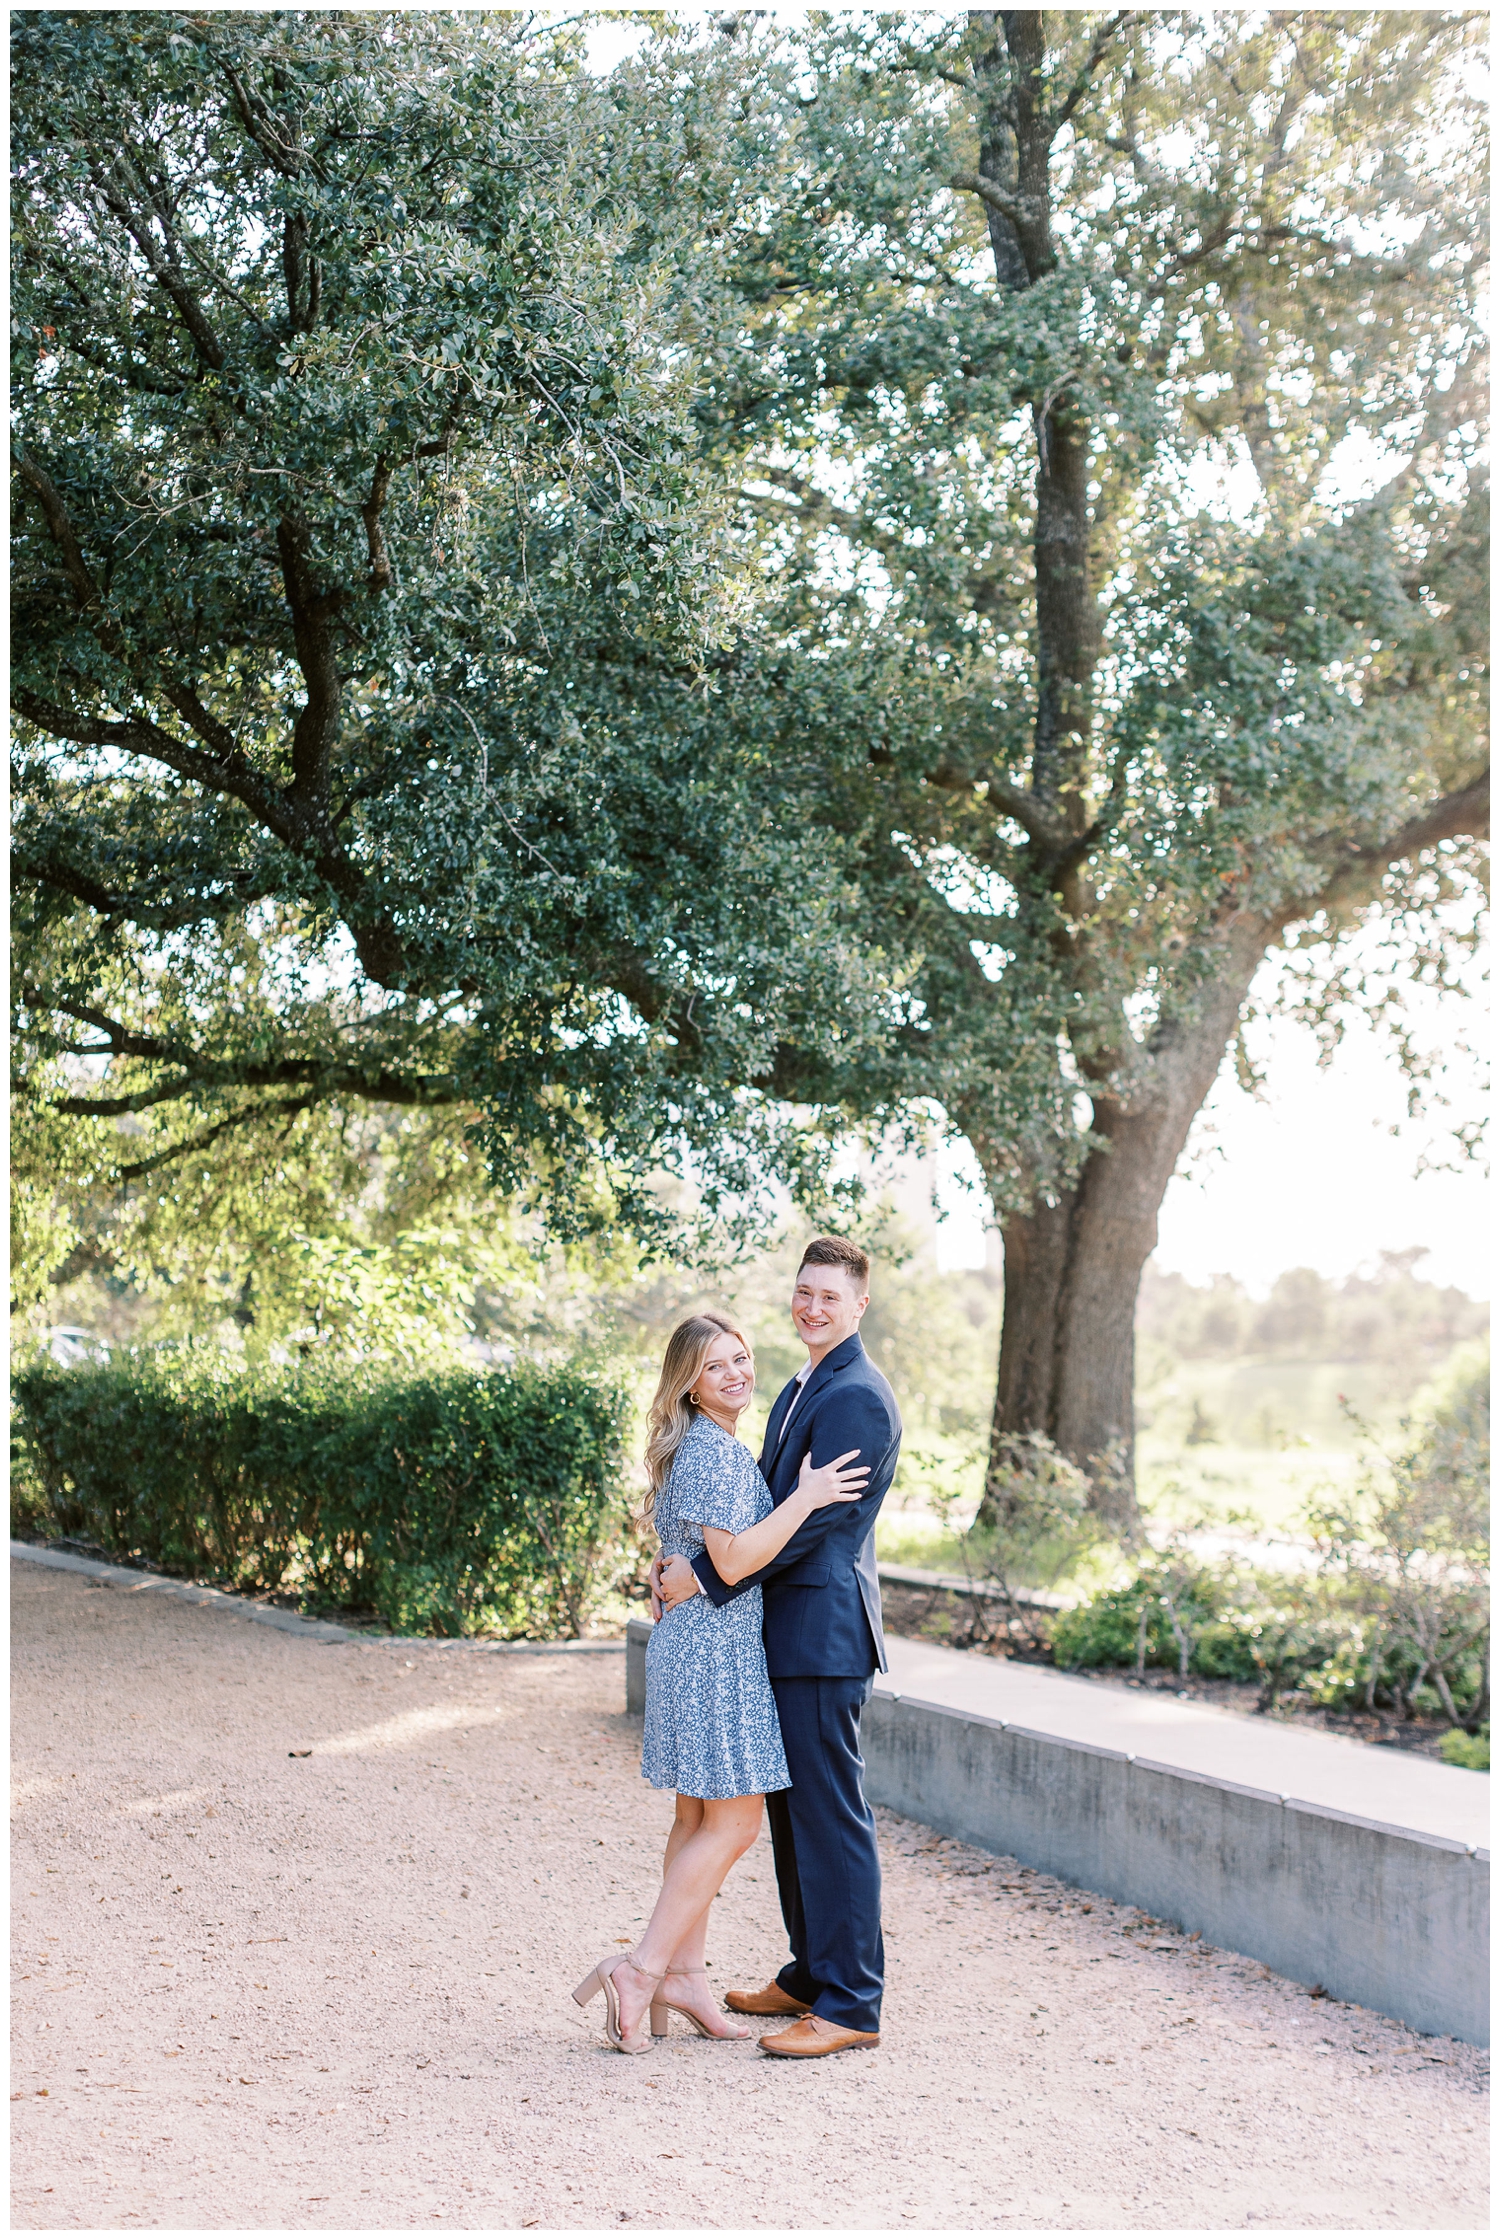 Eleanor Tinsley engagement session with couple in blue suit and dress standing under a tree